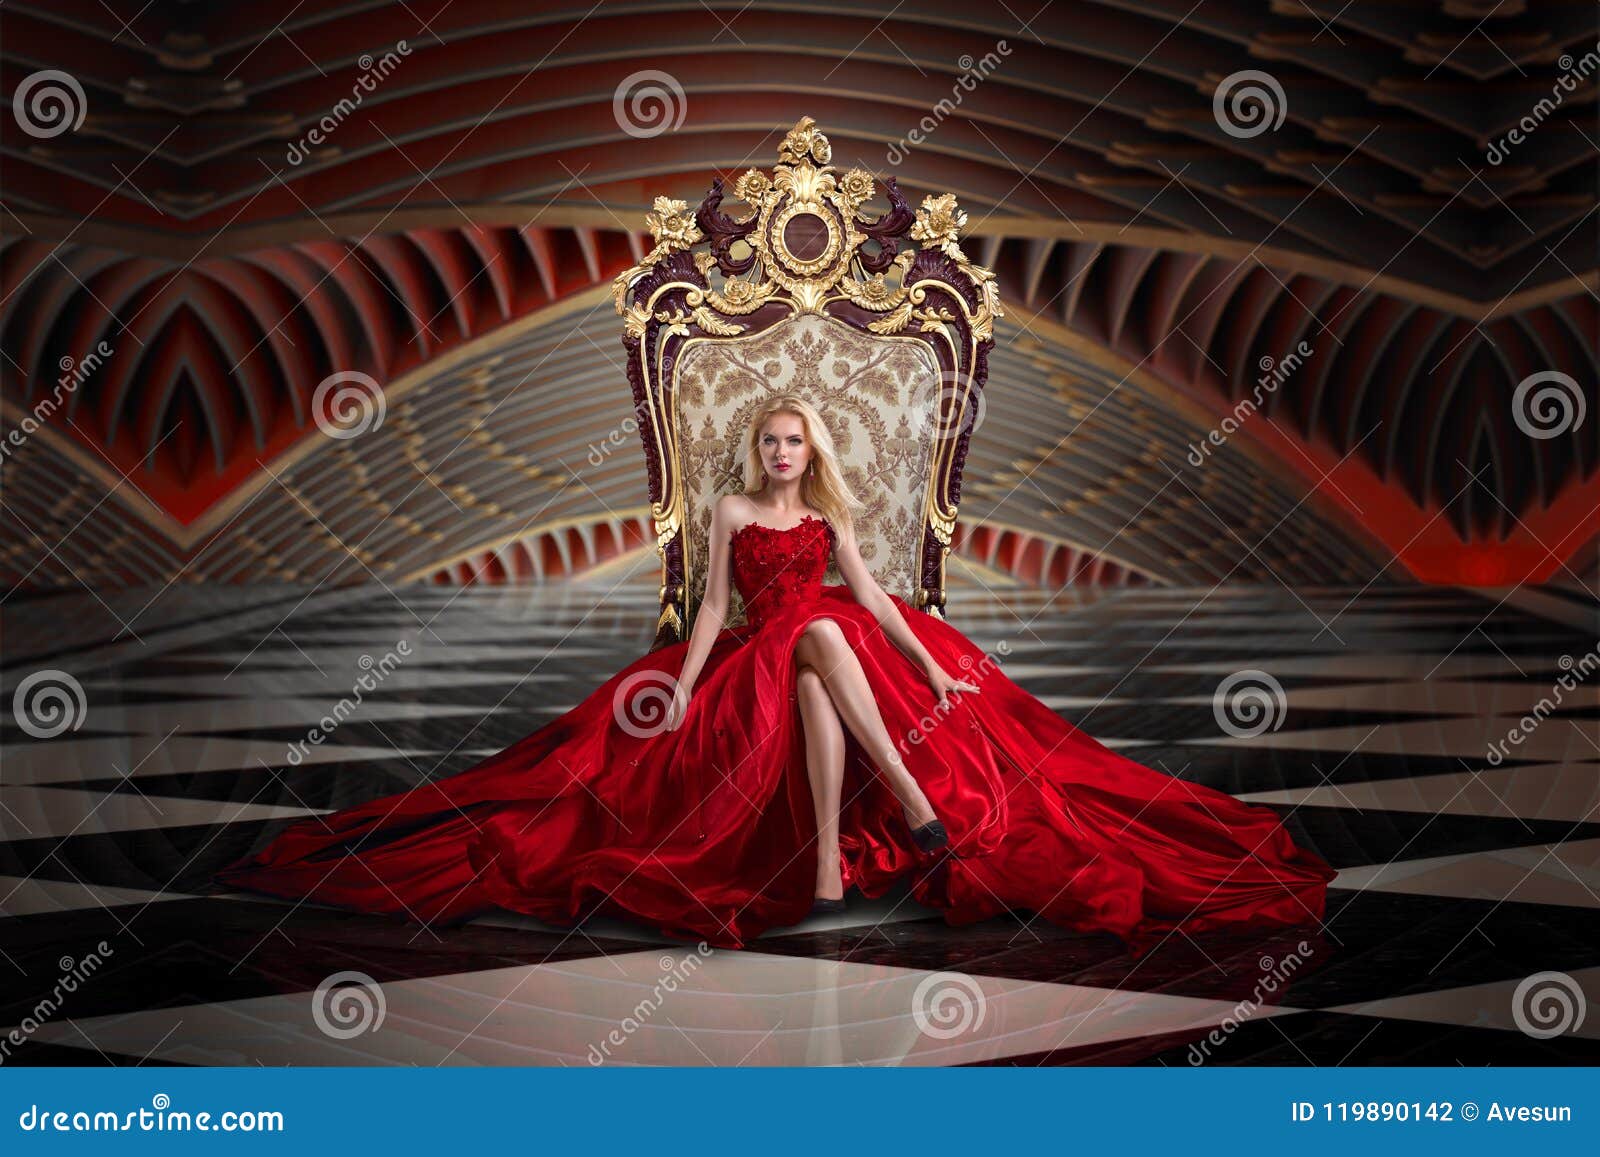 blonde woman sitting on the throne